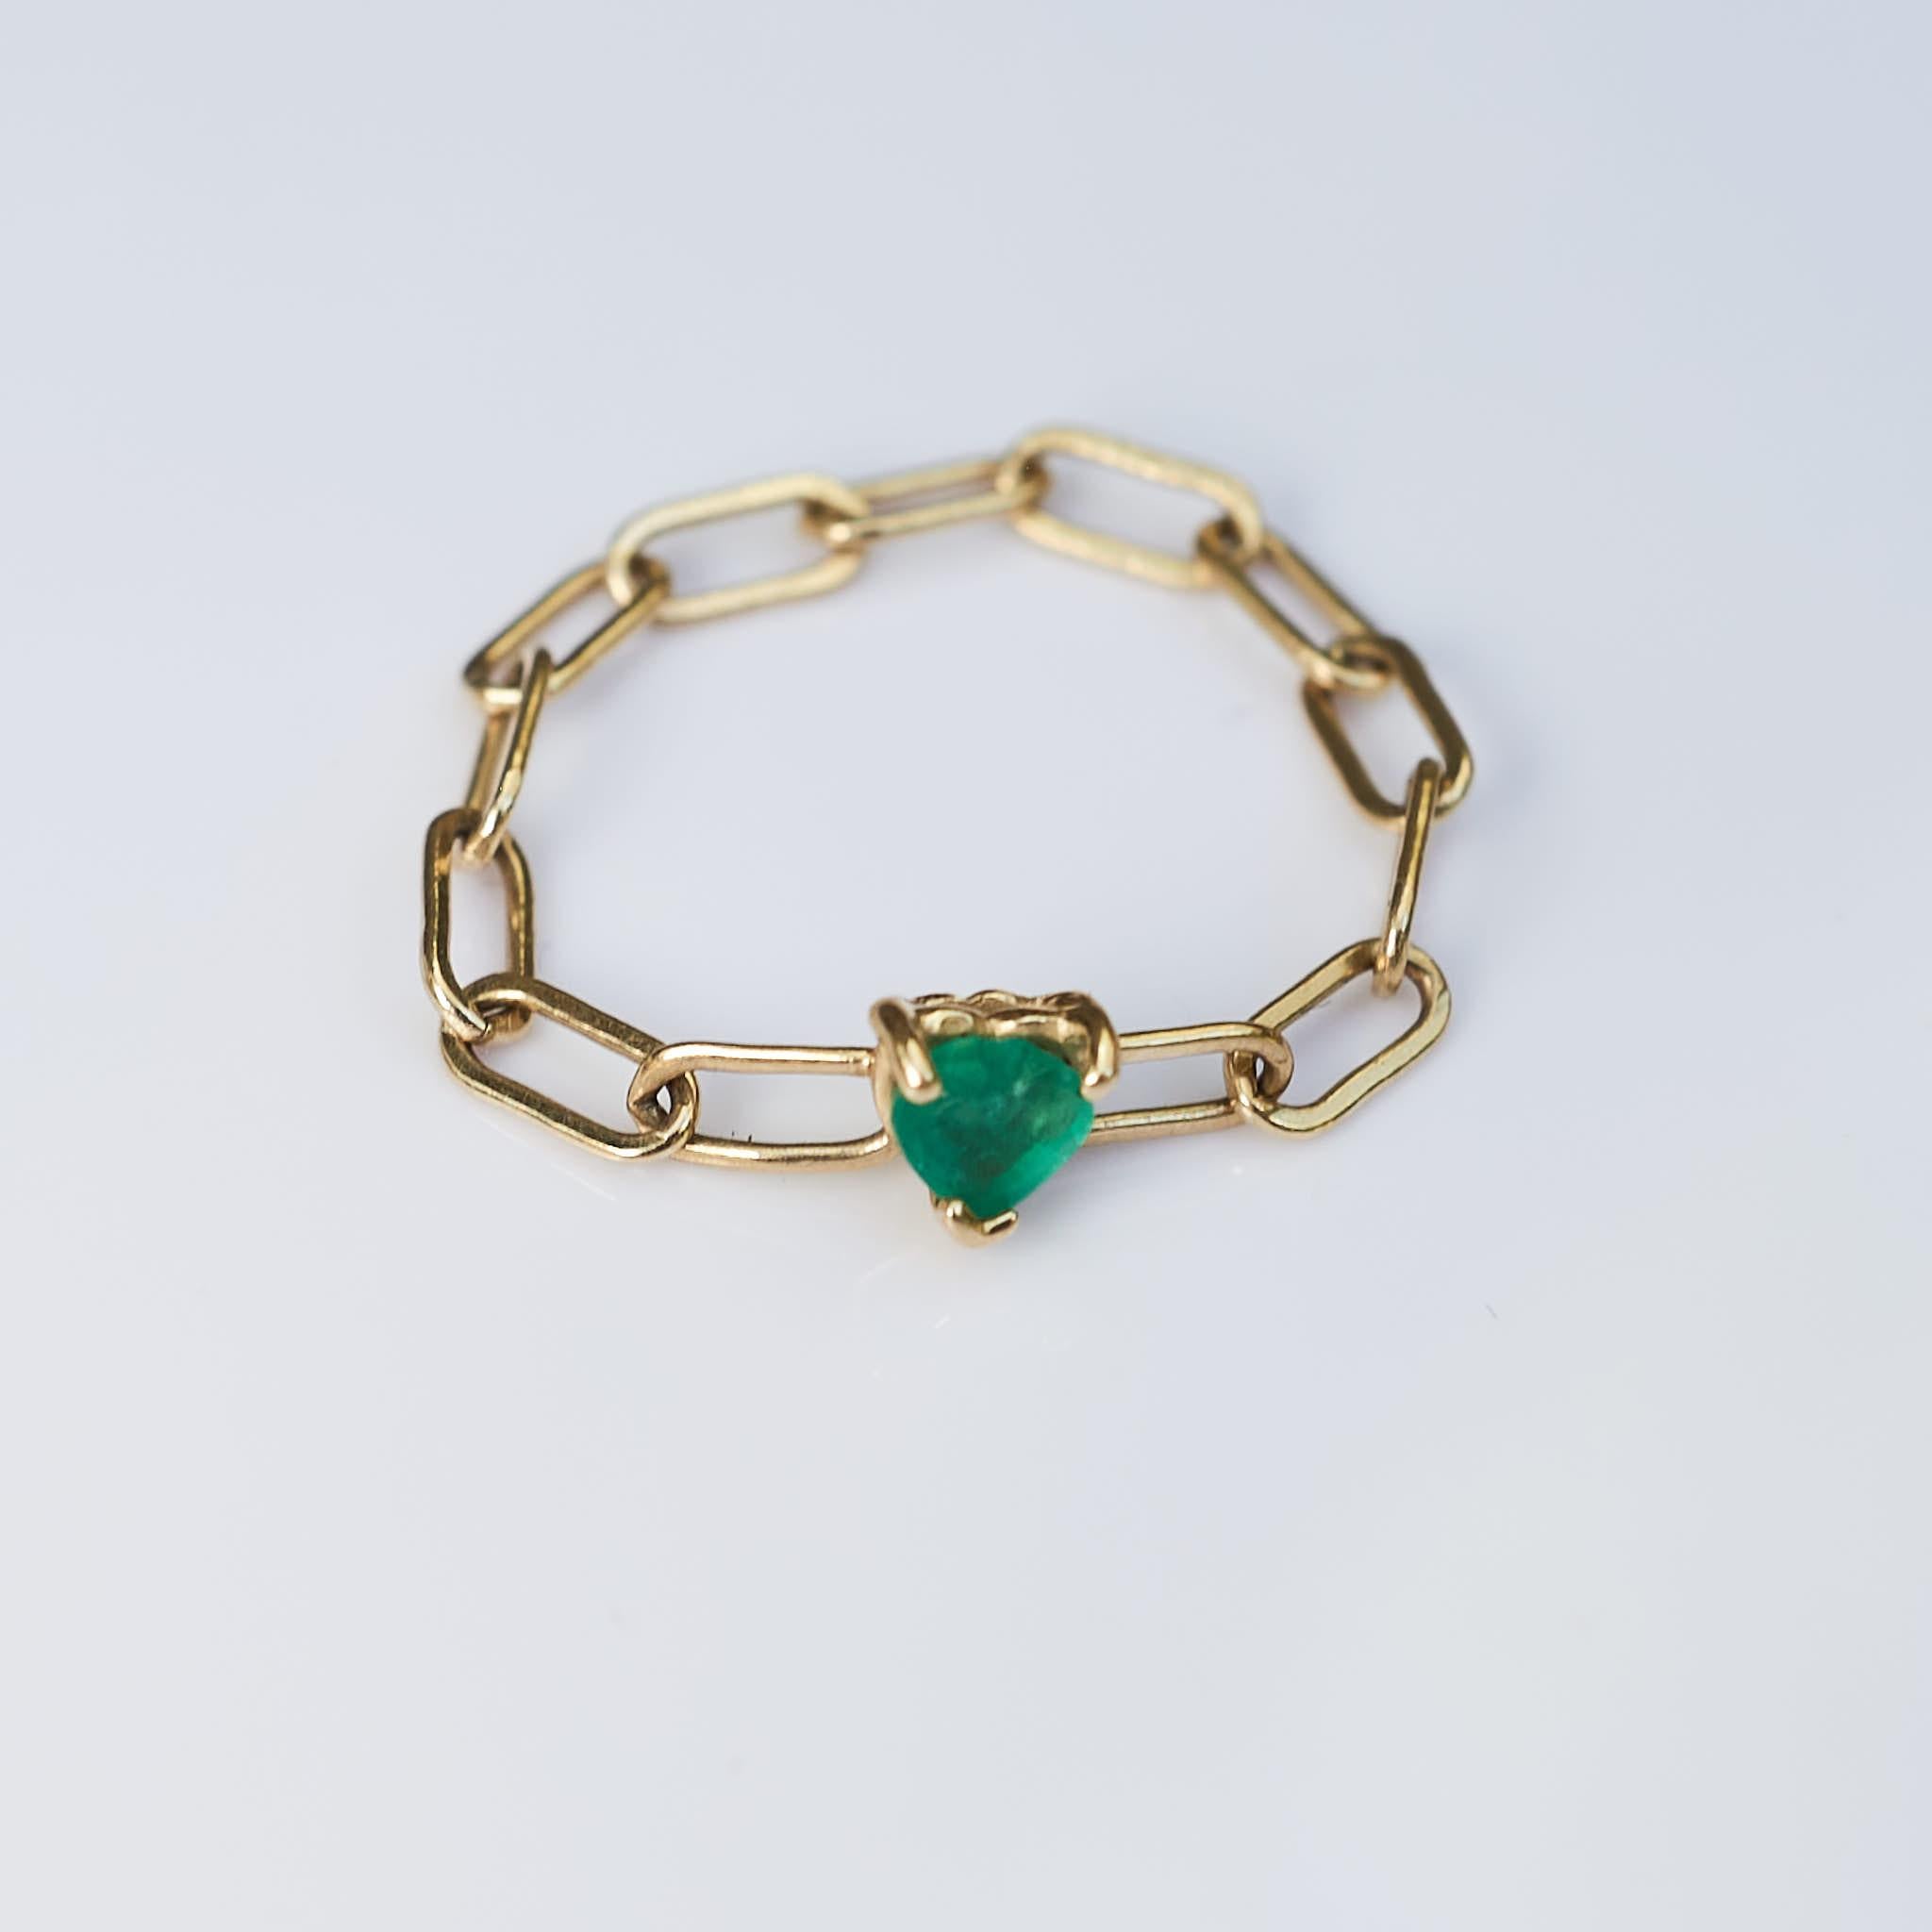 Stack Gold Chain Ring Heart Emerald 14K J Dauphin

Made in Los Angeles

Available for immediate delivery

Can be custom made in any size, with various gems: Sapphire, Diamond, ruby or opal.